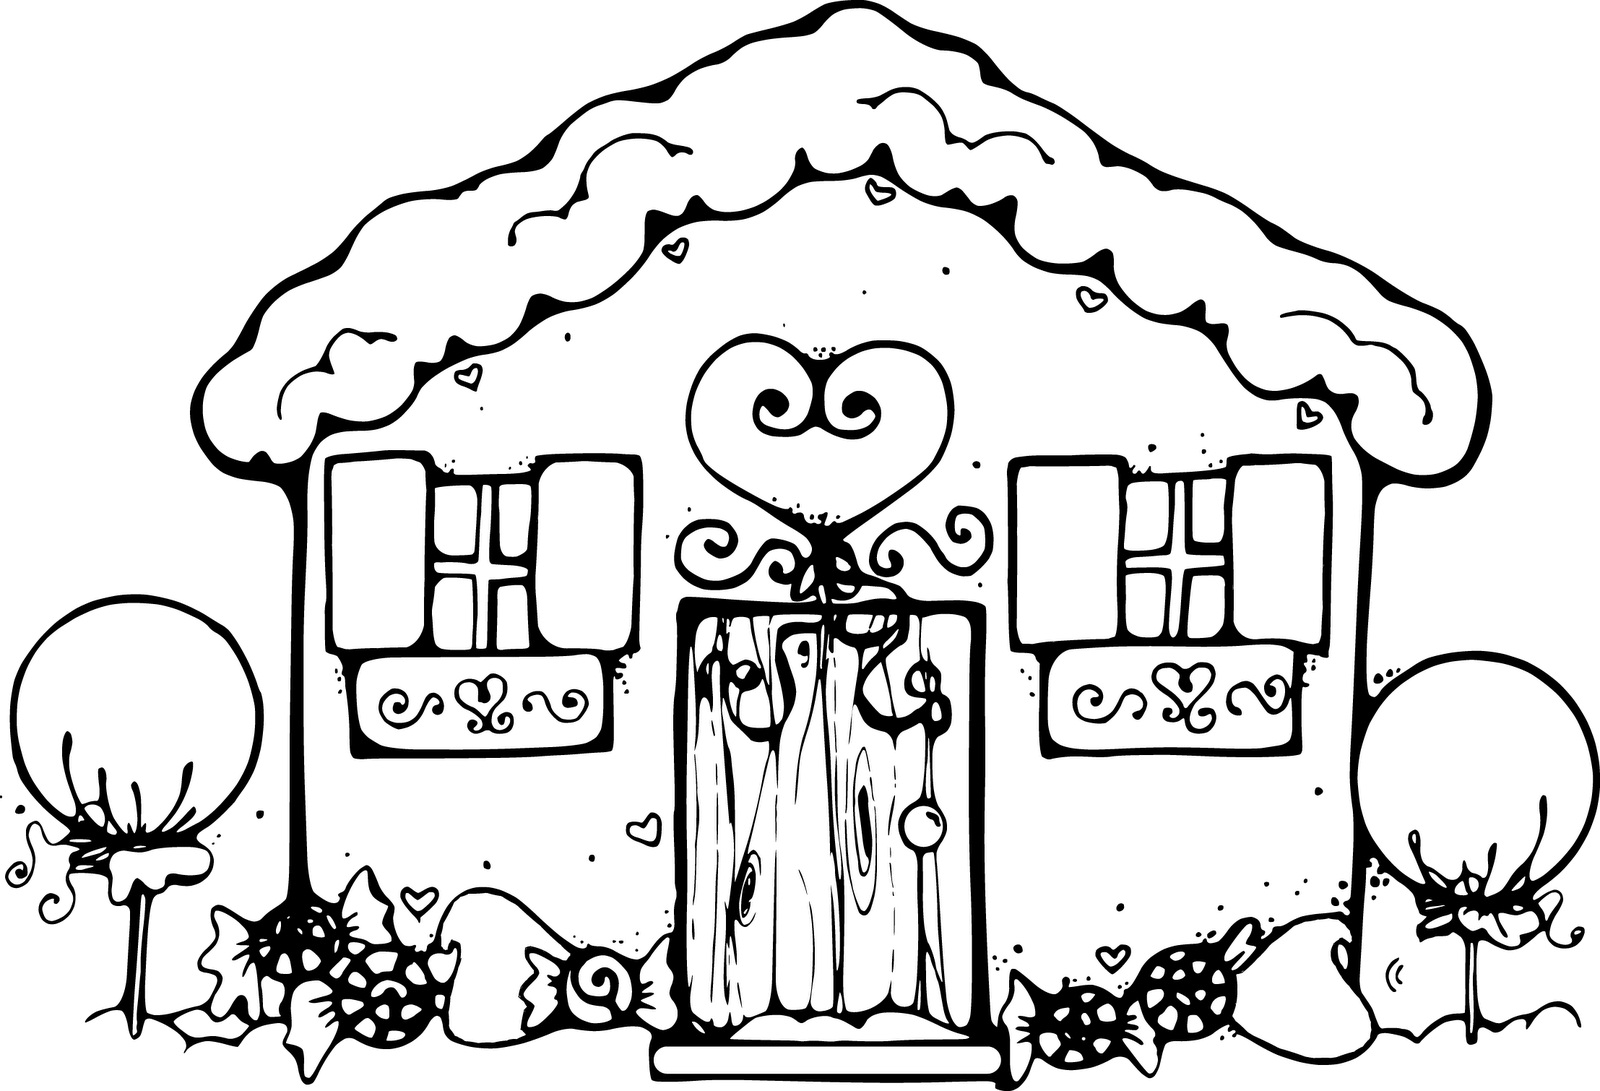 Gingerbread house coloring pages to download and print for free